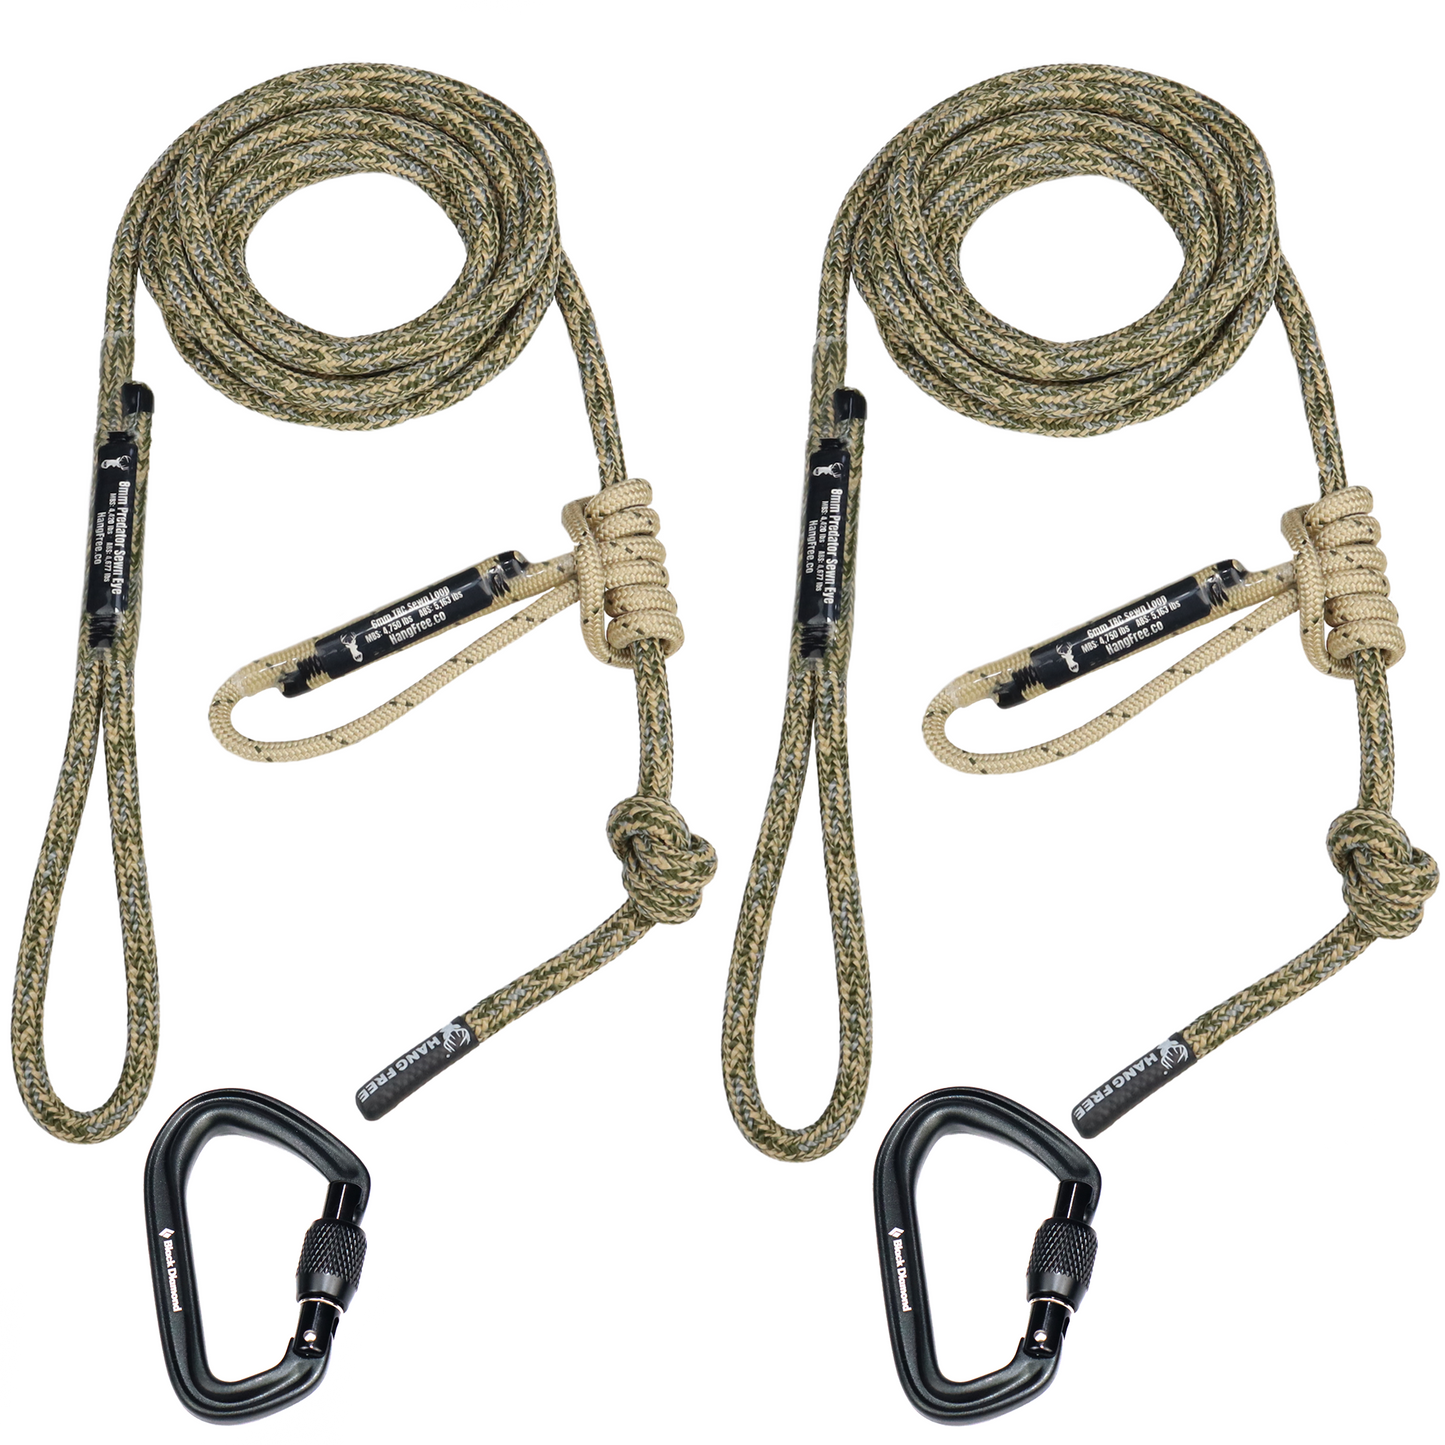 Standard Predator Tether and Lineman's Package in Desert Camo with Carabiner